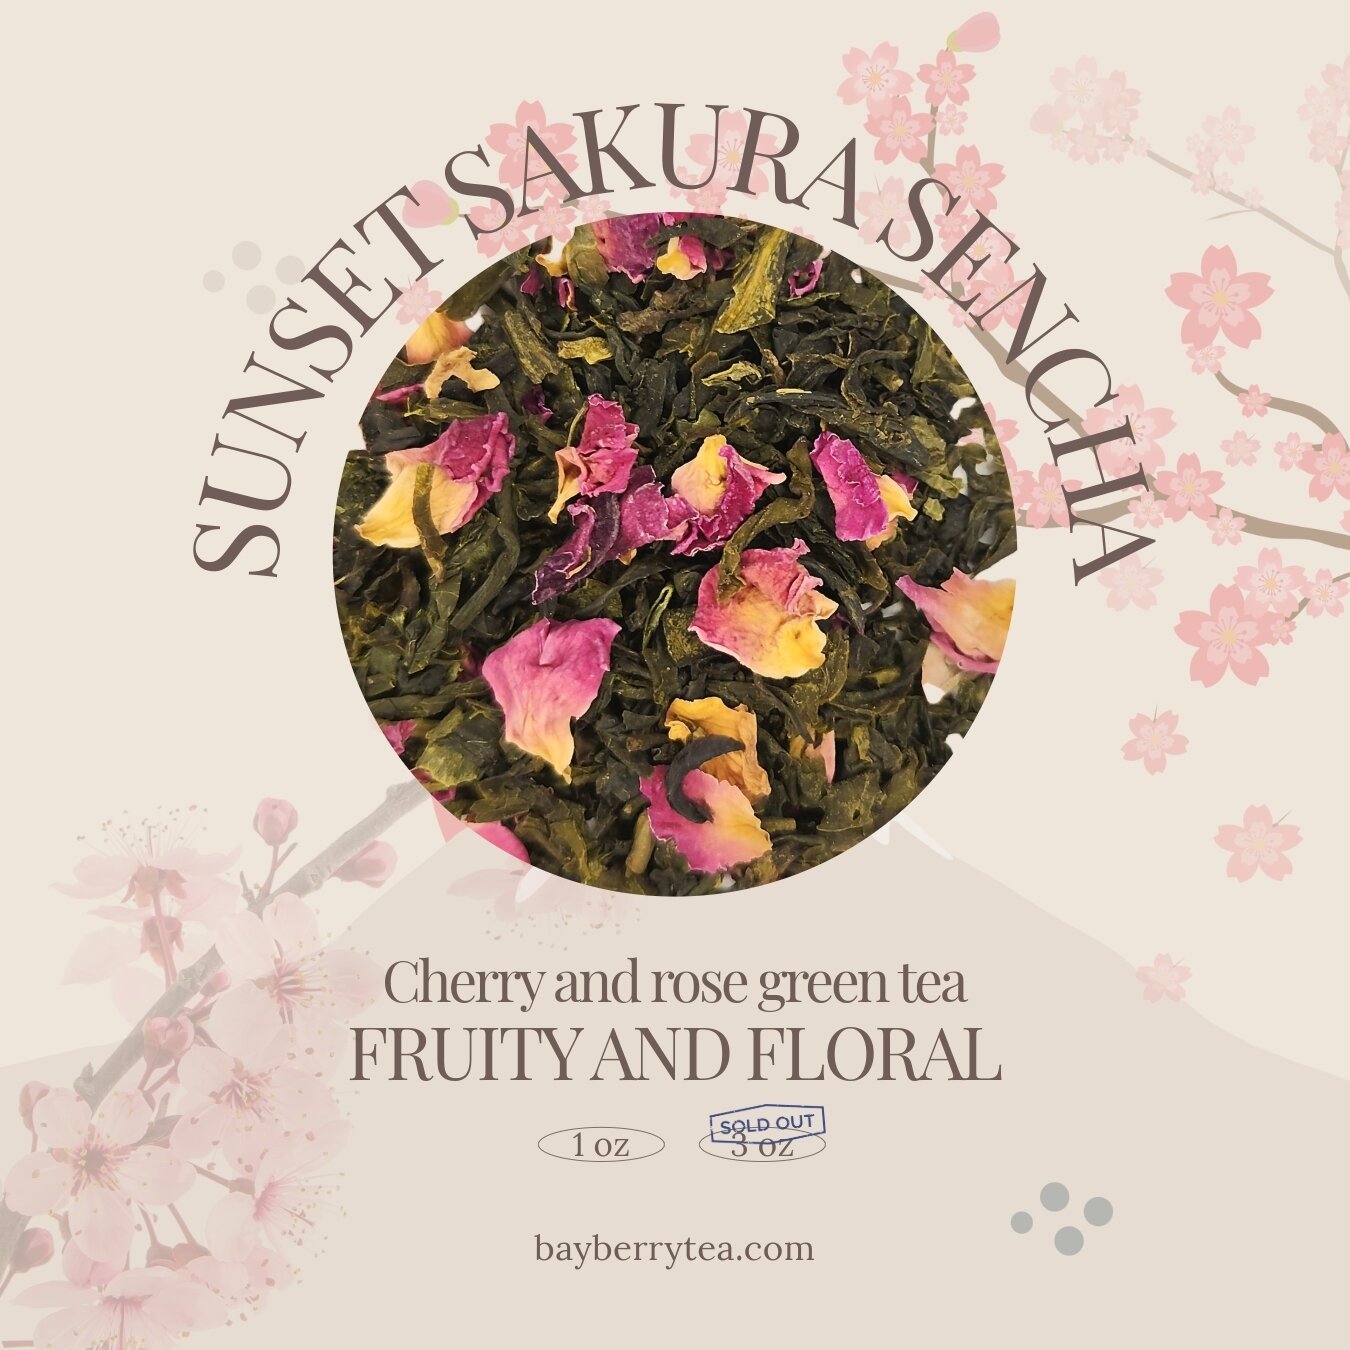 Nothing says 'I love you' like a steaming cup of Sunset Sakura Sencha on Valentine's Day. 💚🌸 Embrace the sweet blend of cherry and rose flavors and indulge in a magical tea moment. 🌅✨ #GreenTeaLove #ValentinesDayVibes